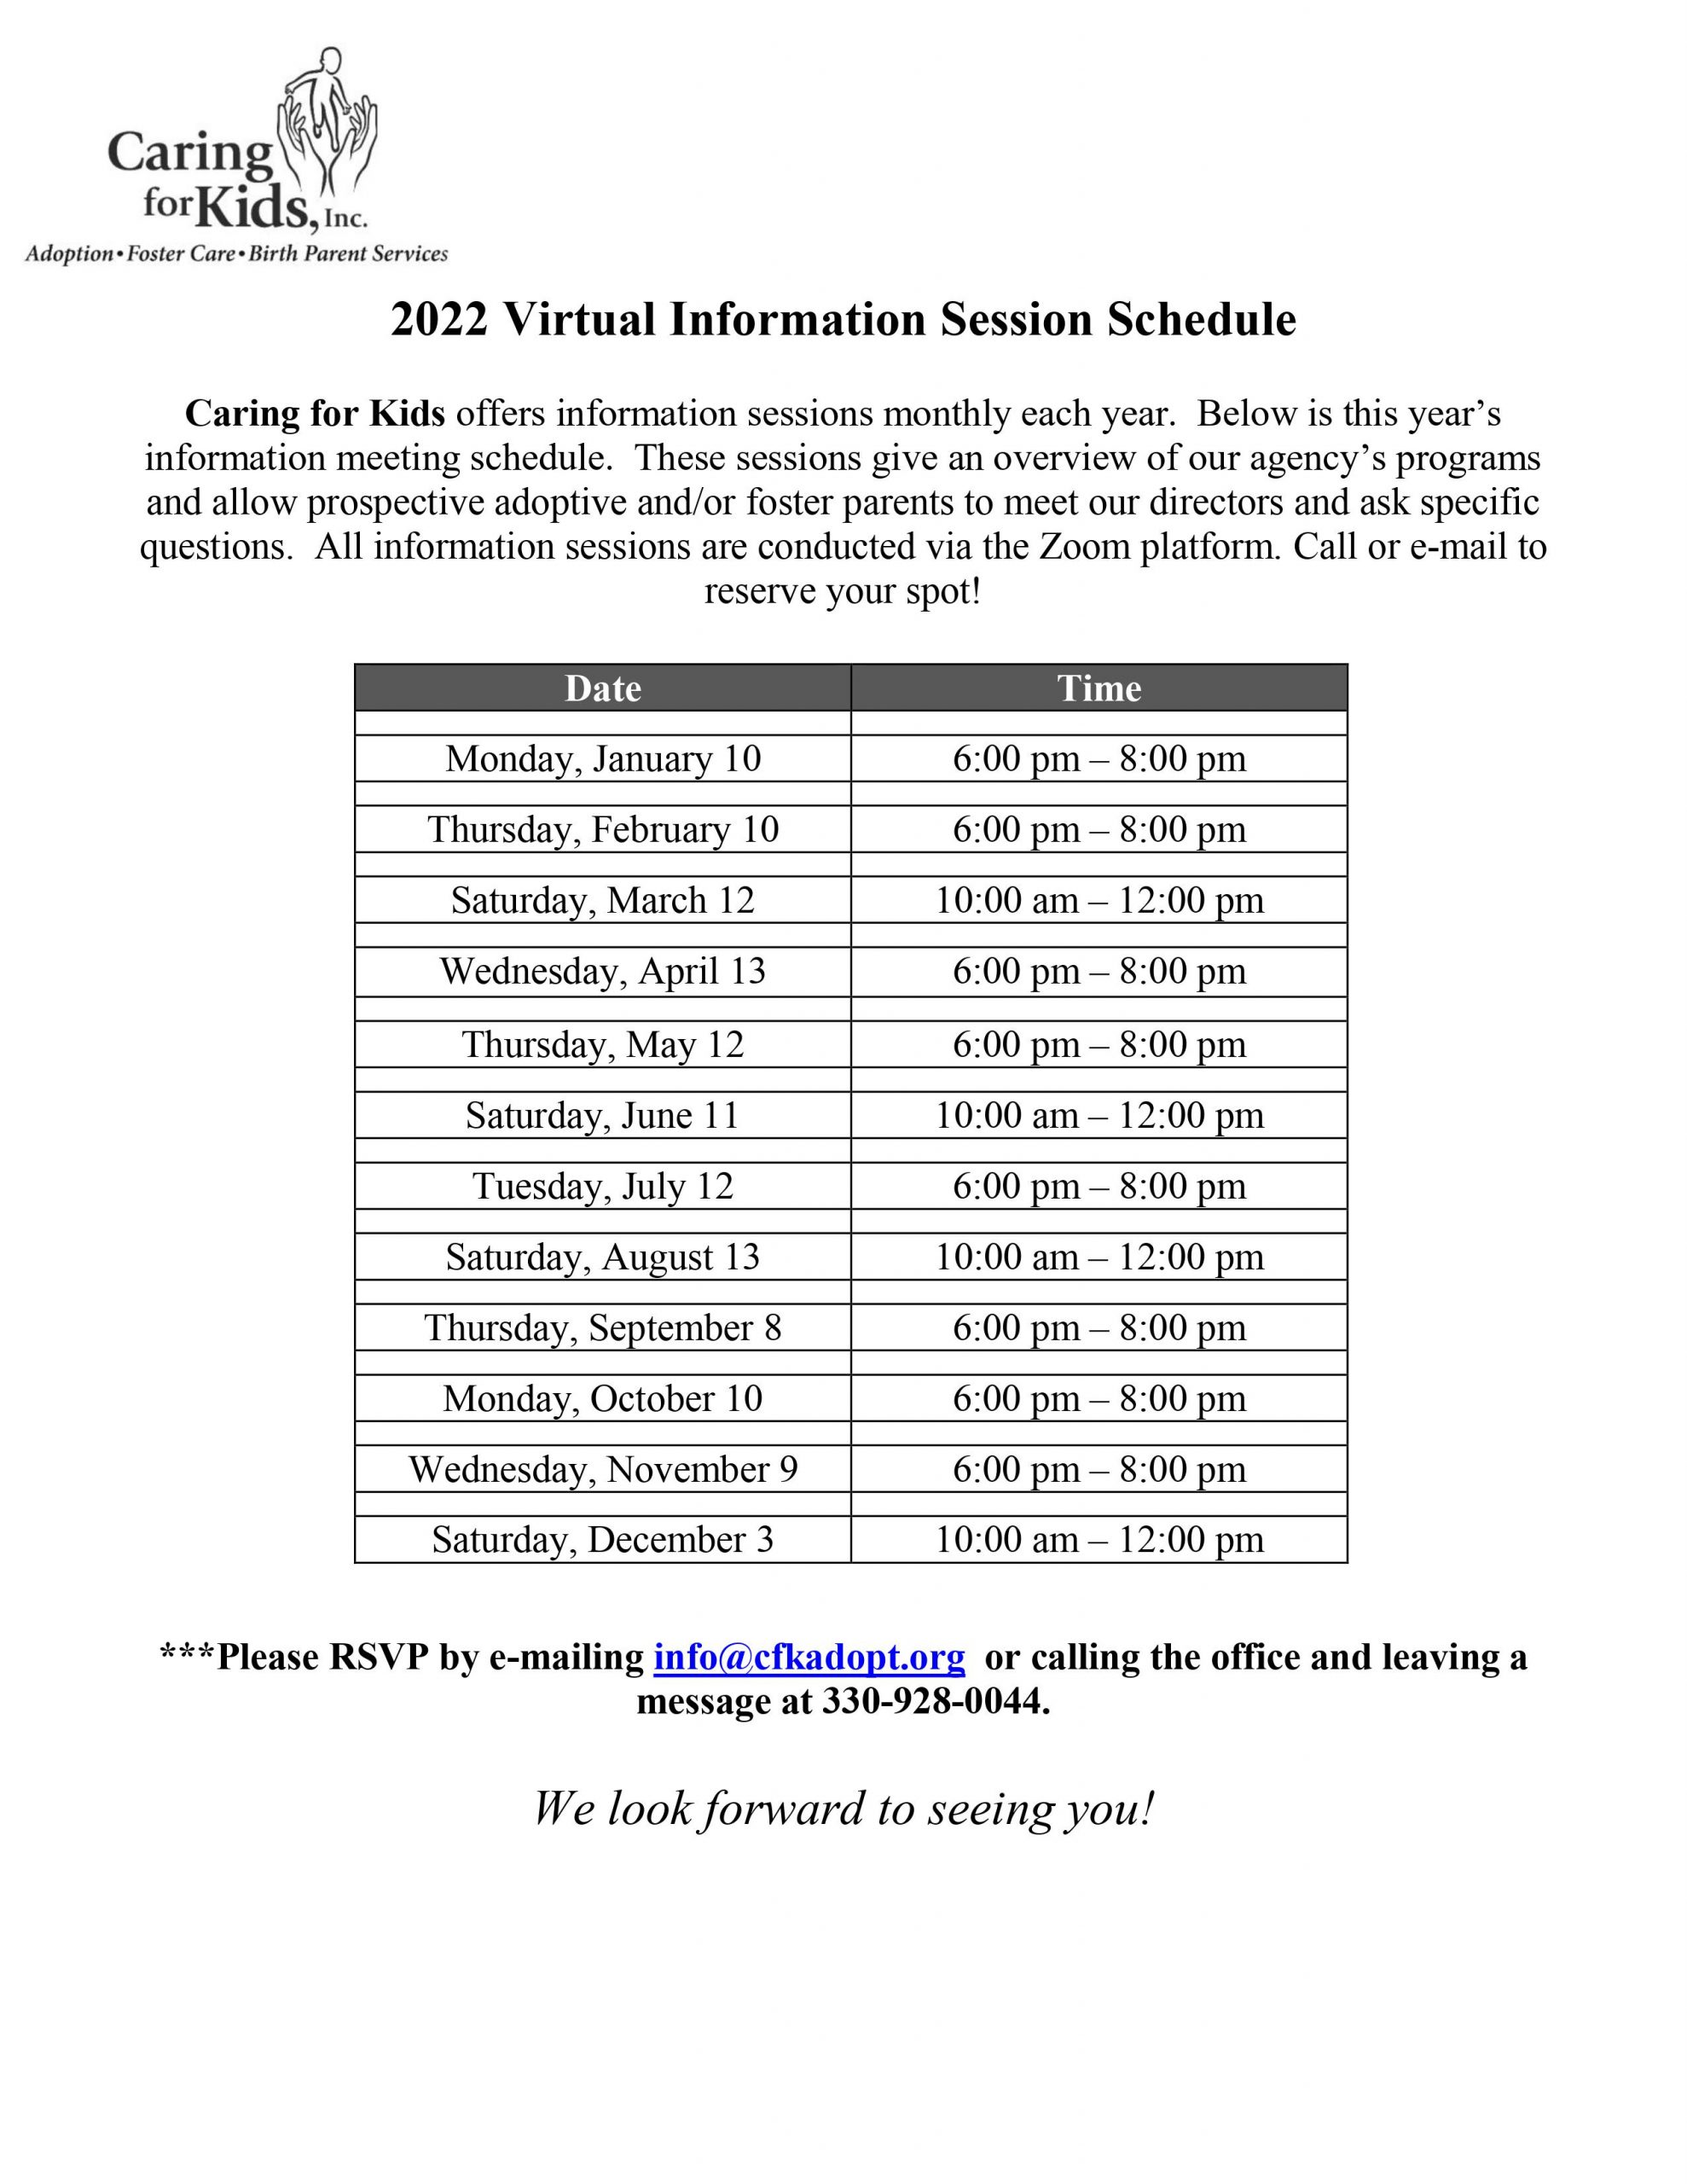 Virtual Information Session Schedule 2022